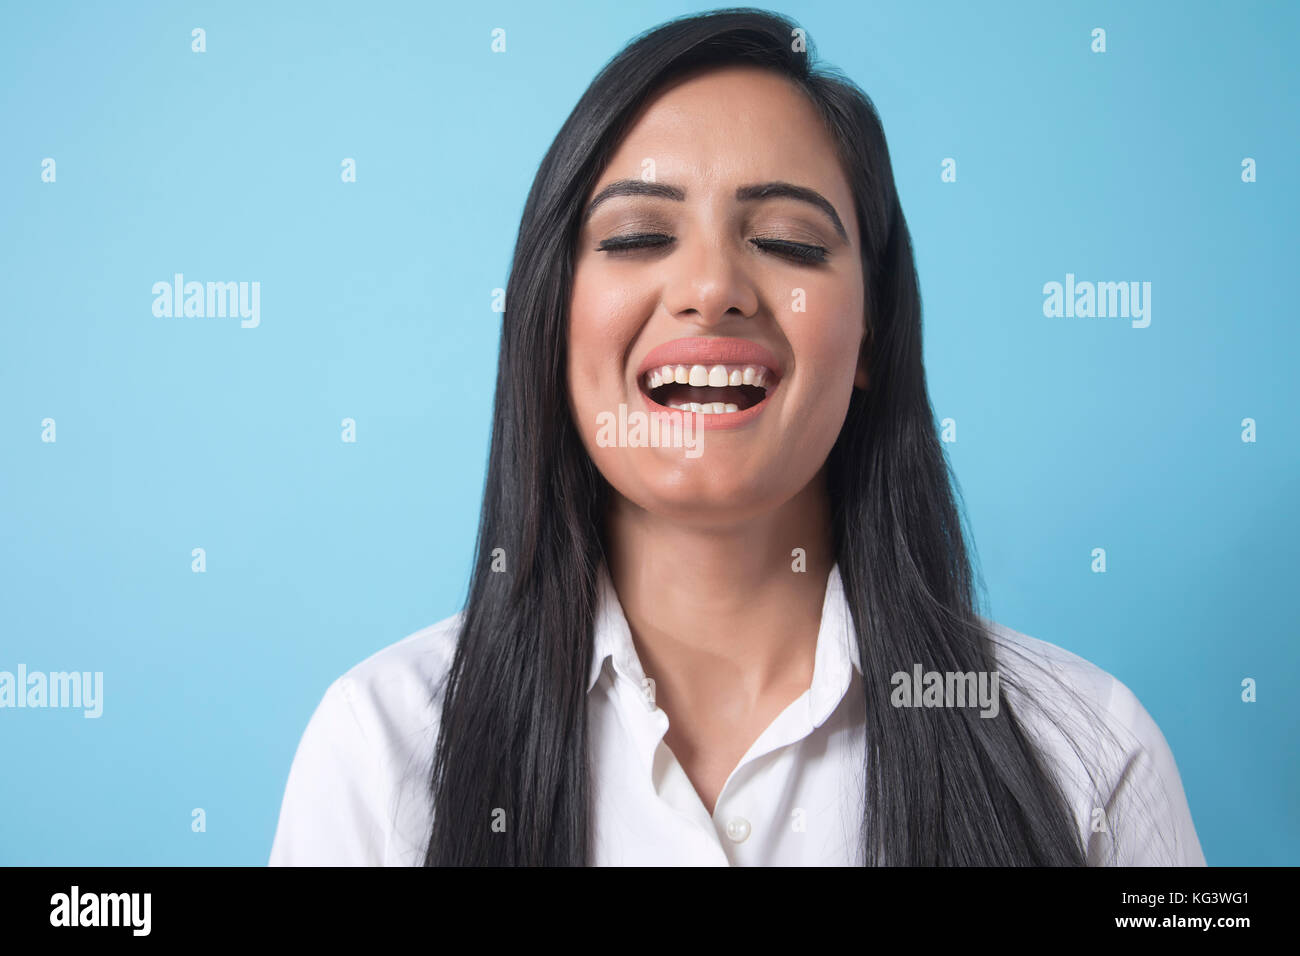 Portrait of smiling businesswoman over blue background Stock Photo